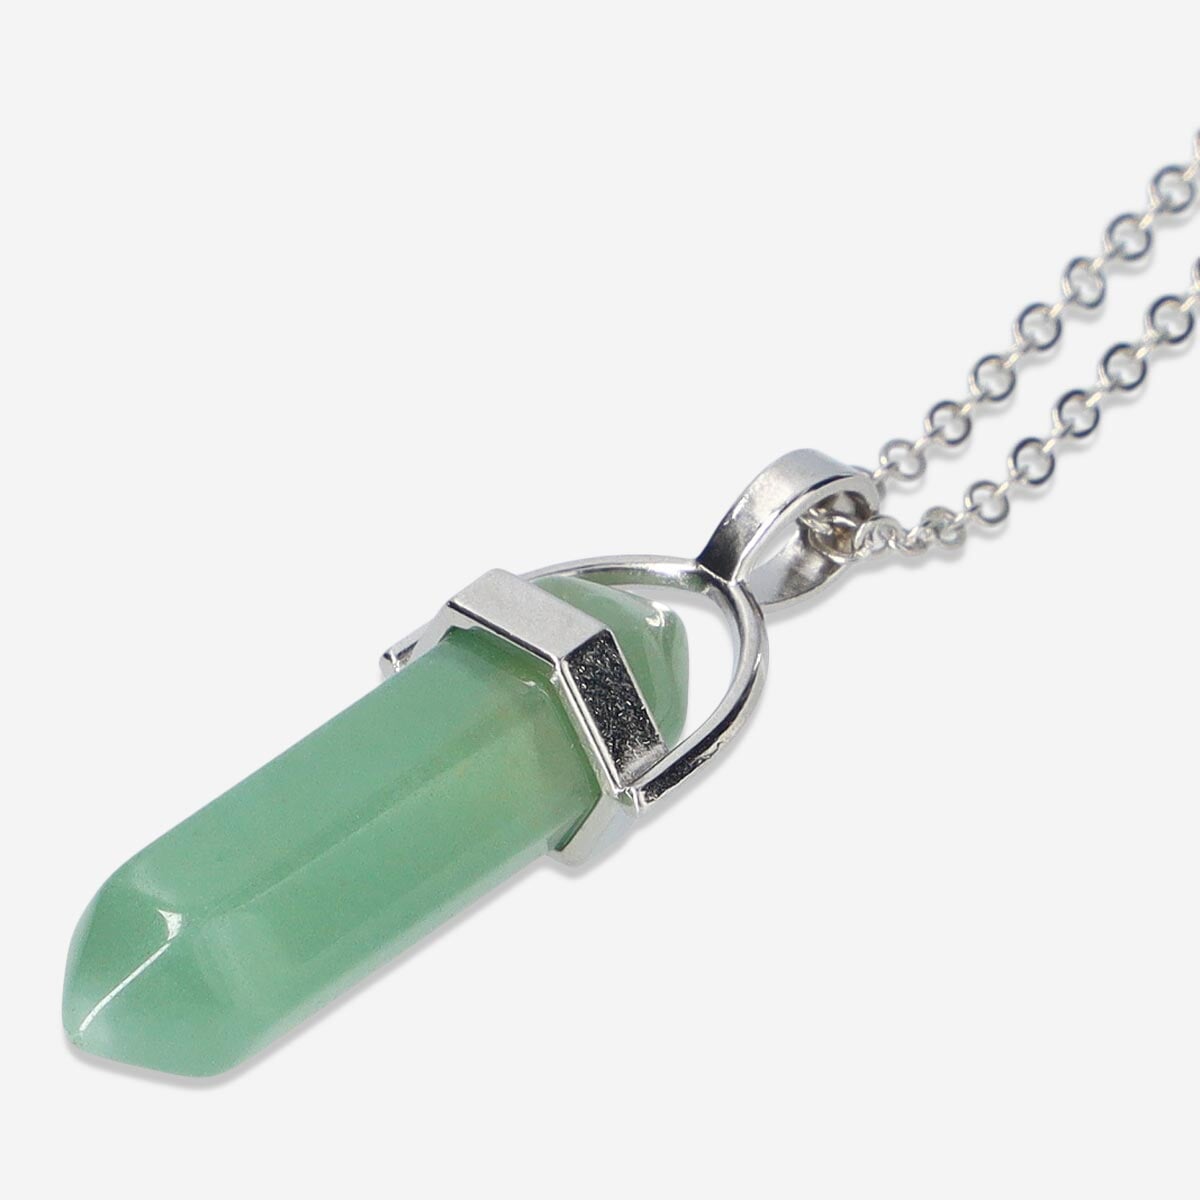 Buy Natural Green Aventurine Pencil Point Pendant Necklace Green Aventurine  Crystal Pendant at Amazon.in